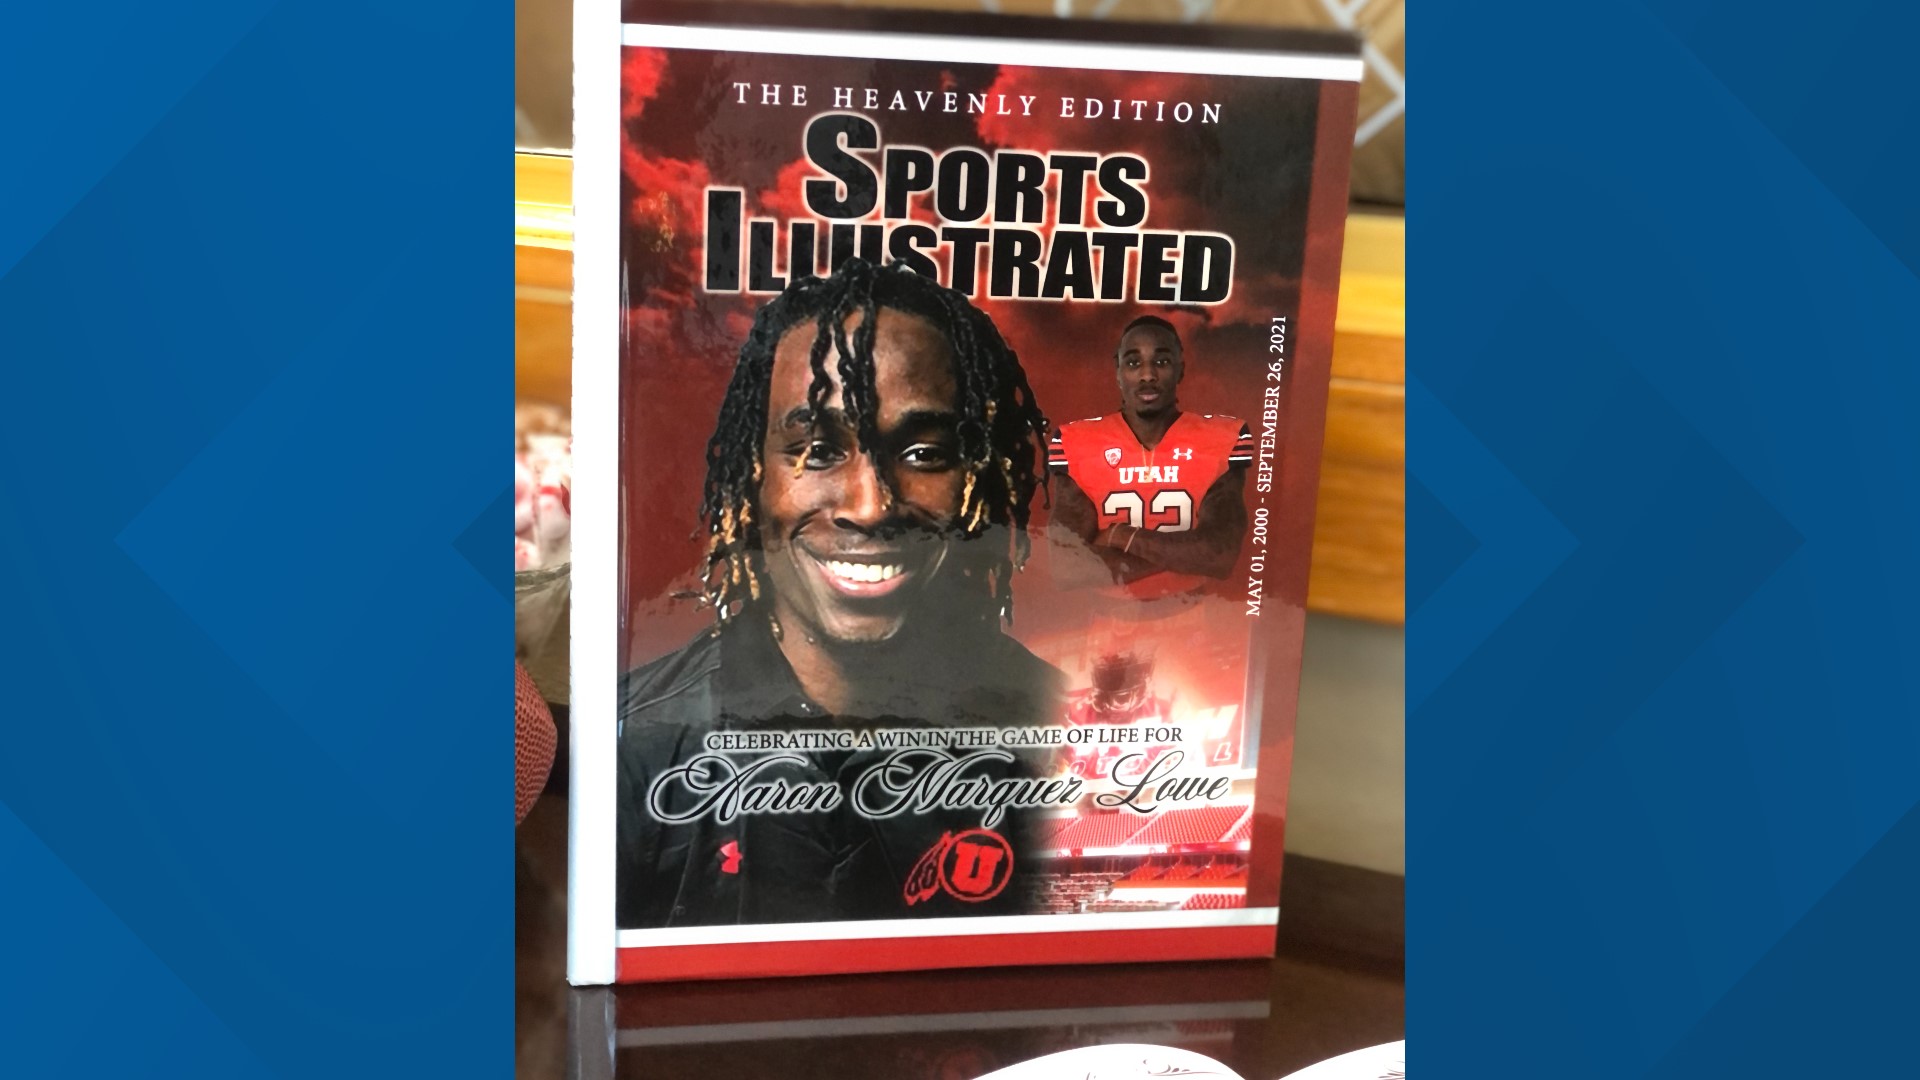 On Monday afternoon, Aaron Lowe, the North Texas native who played for the University of Utah football team, will be laid to rest.